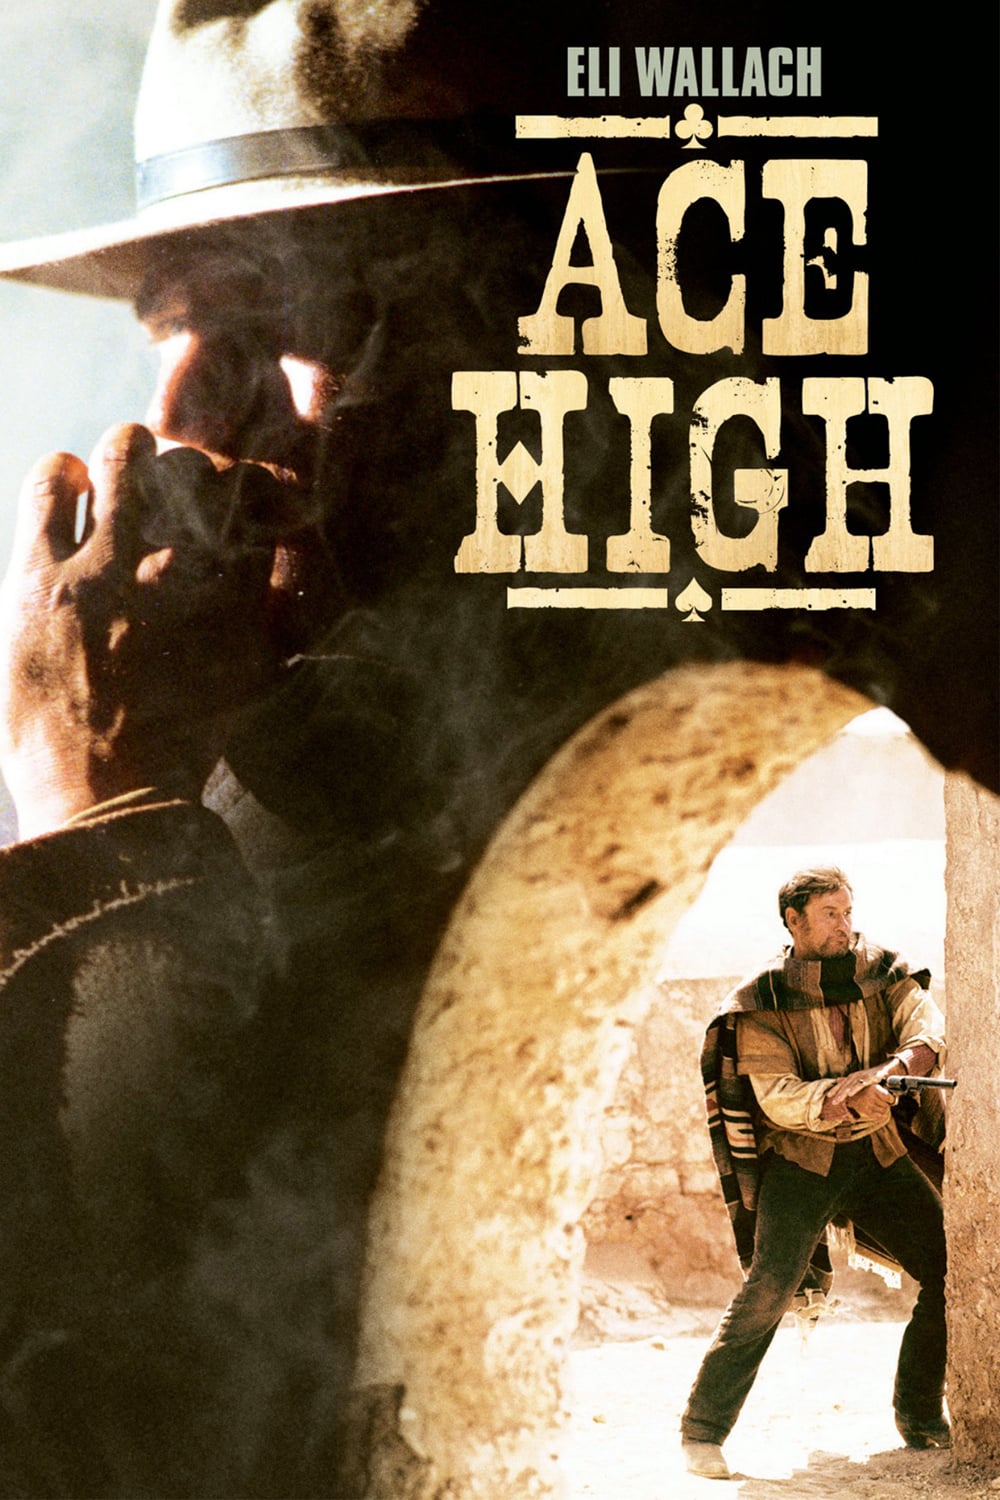 Poster for the movie "Ace High"